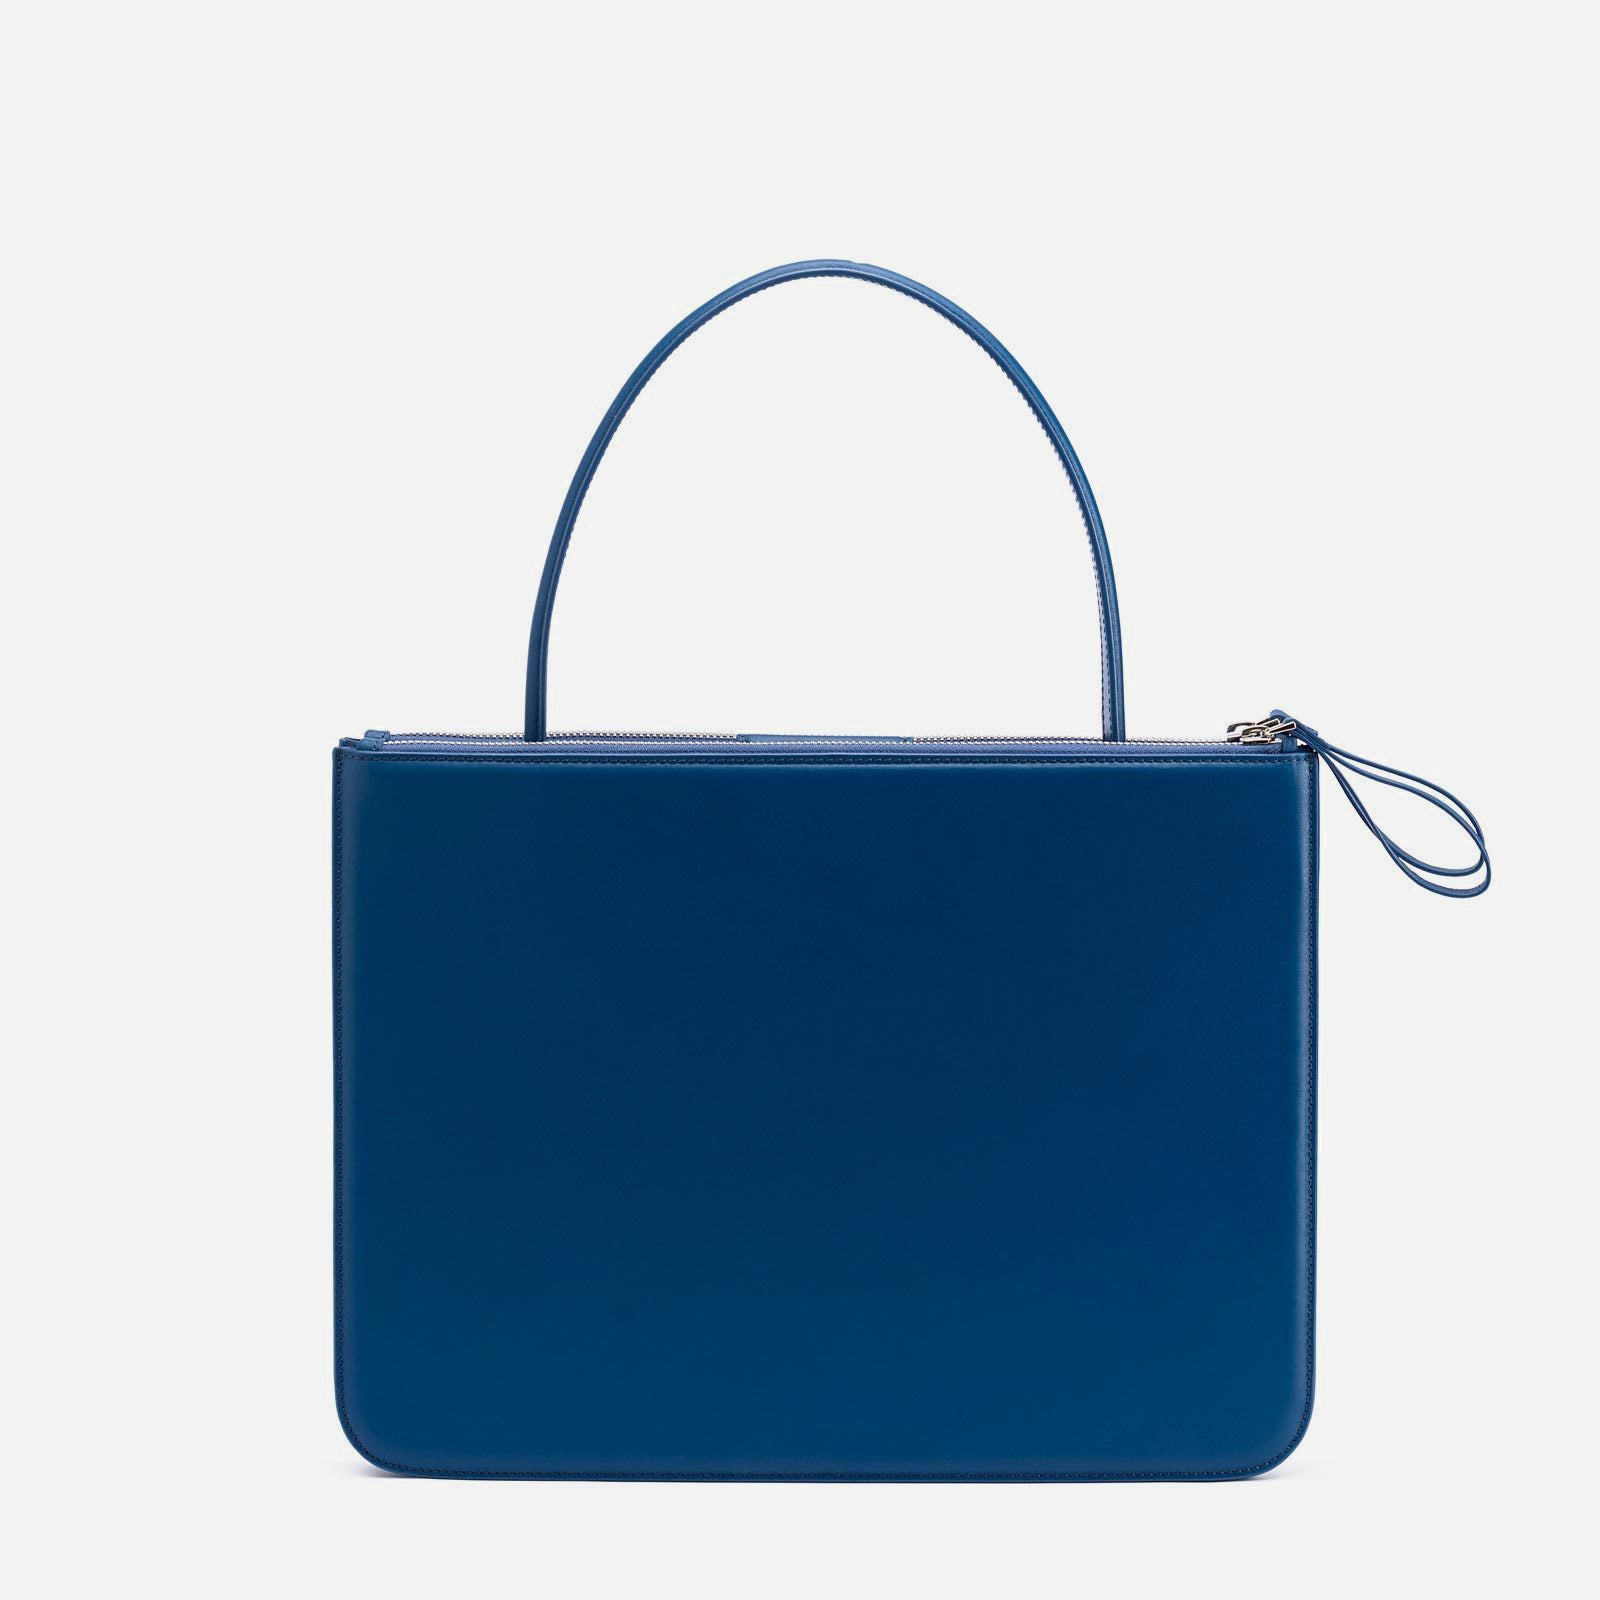 Back view of blue rectangular purse with small handle